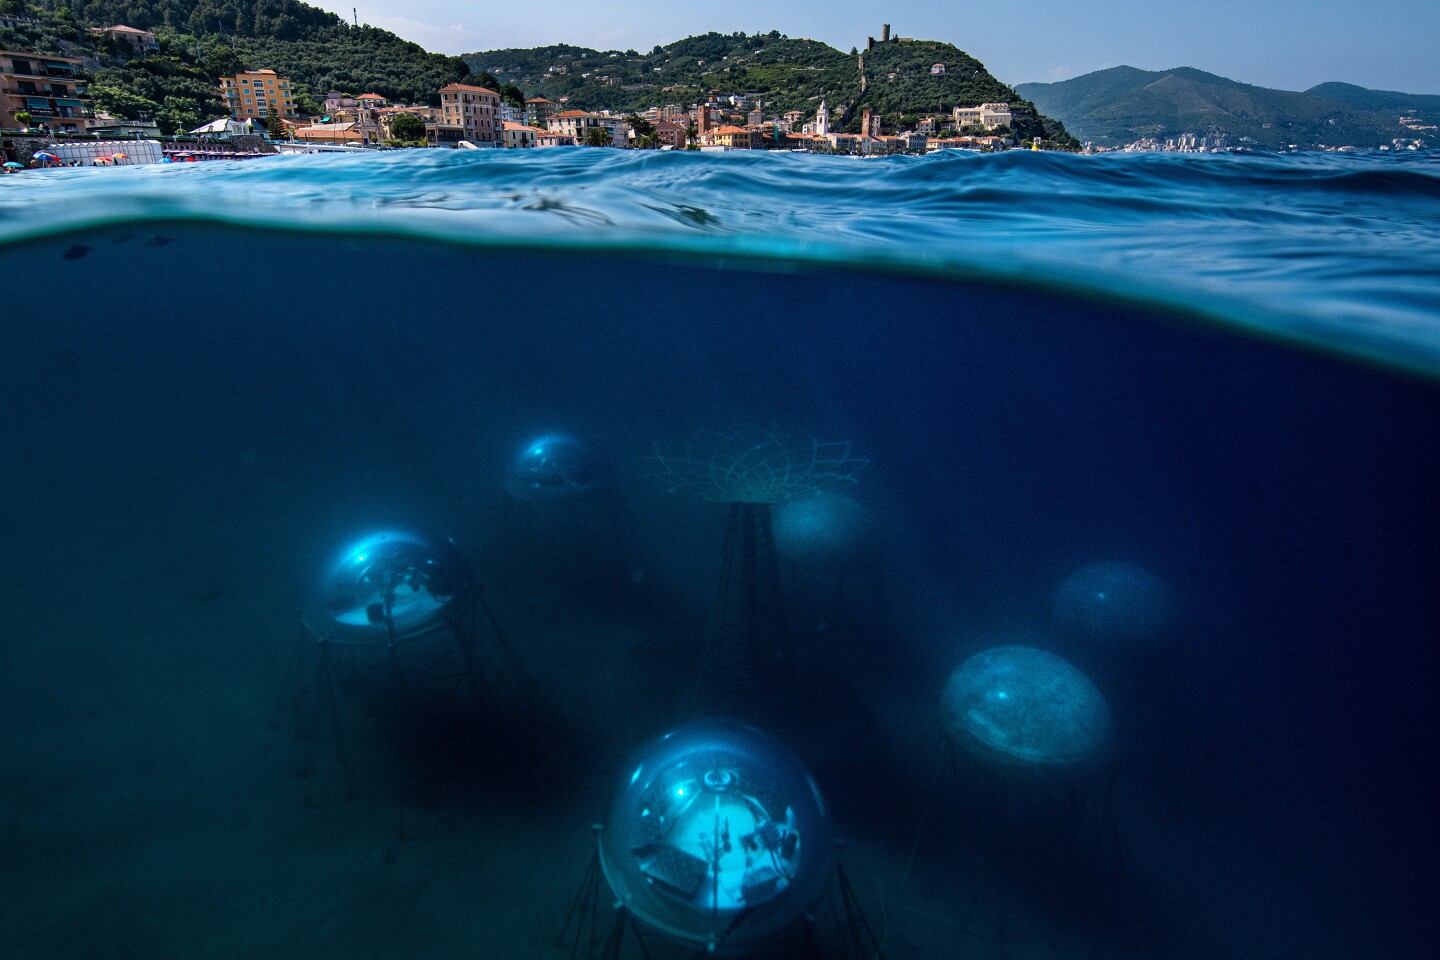 Nemo's Garden. The biospheres are located 40 metres off the Noli shore – a small village on the Ligurian coast. They are constructed 6-12 metres below the surface of the water, to enable the plants to draw the necessary source of light for their development.